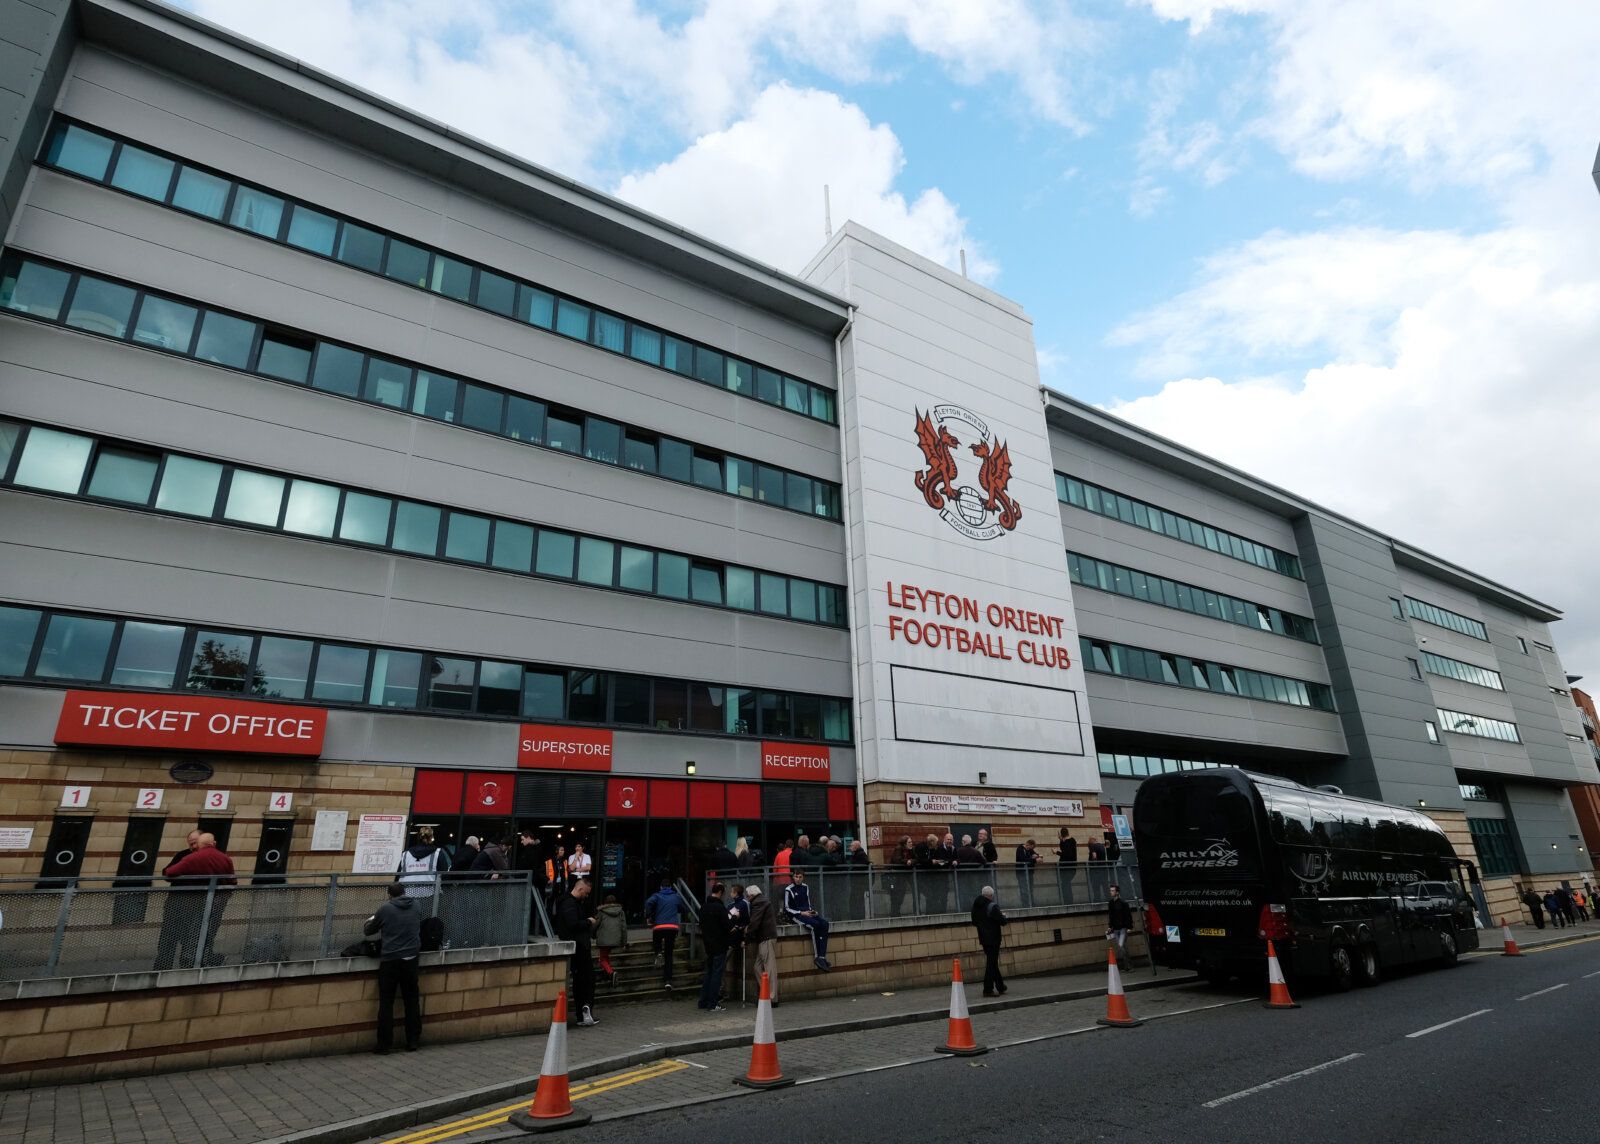 Football Soccer Britain - Leyton Orient v Portsmouth - Sky Bet League Two - The Matchroom Stadium, Brisbane Road - 16/17 - 8/10/16
General view outside the stadium before the match 
Mandatory Credit: Action Images / Alan Walter

EDITORIAL USE ONLY.